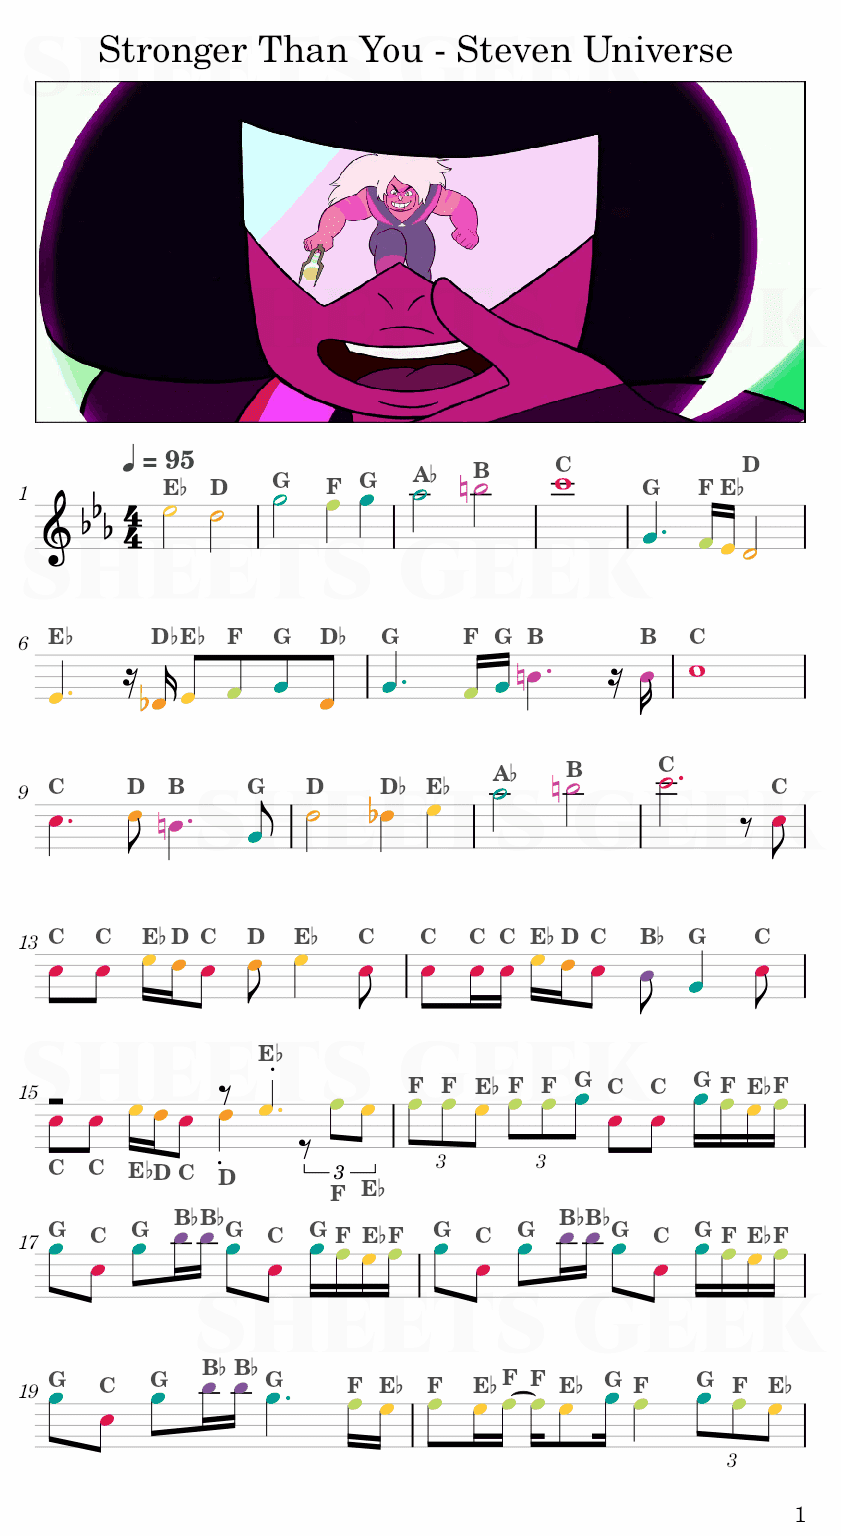 Stronger Than You - Steven Universe Easy Sheets Music Free for piano, keyboard, flute, violin, sax, celllo 1